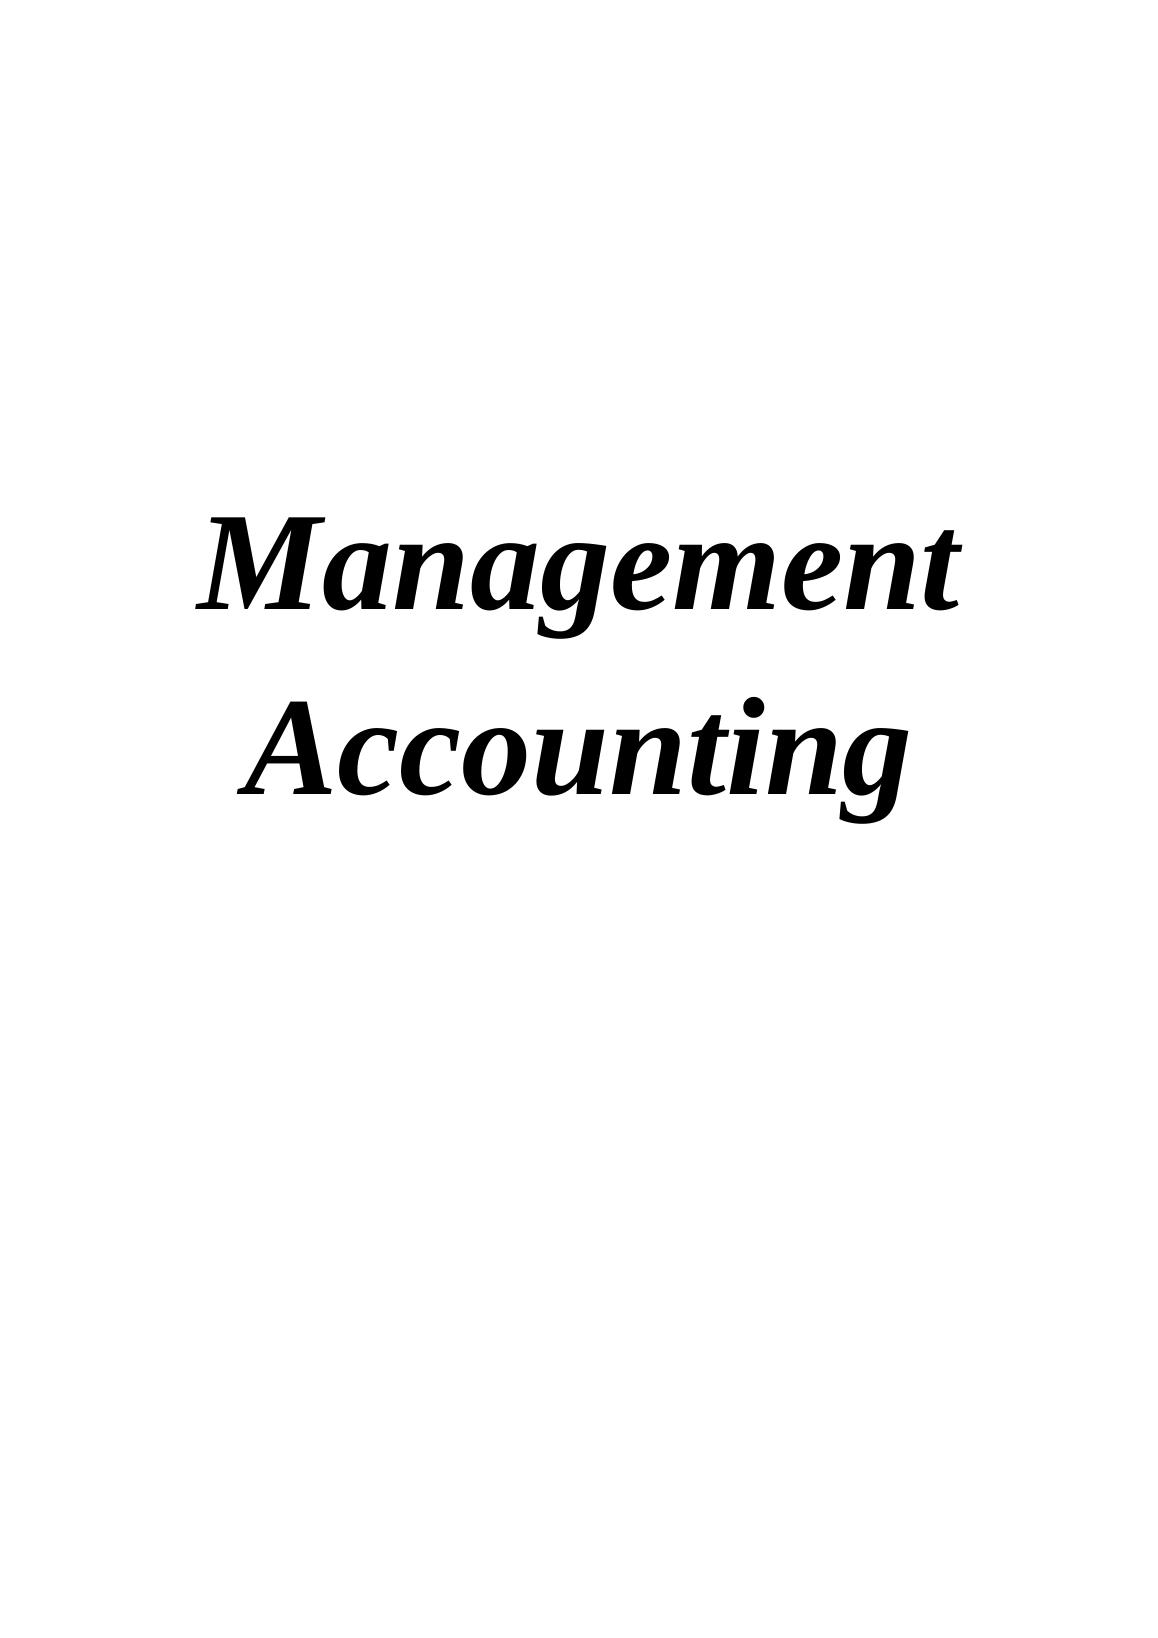 Management Accounting: Importance, Systems, and Budgets_1